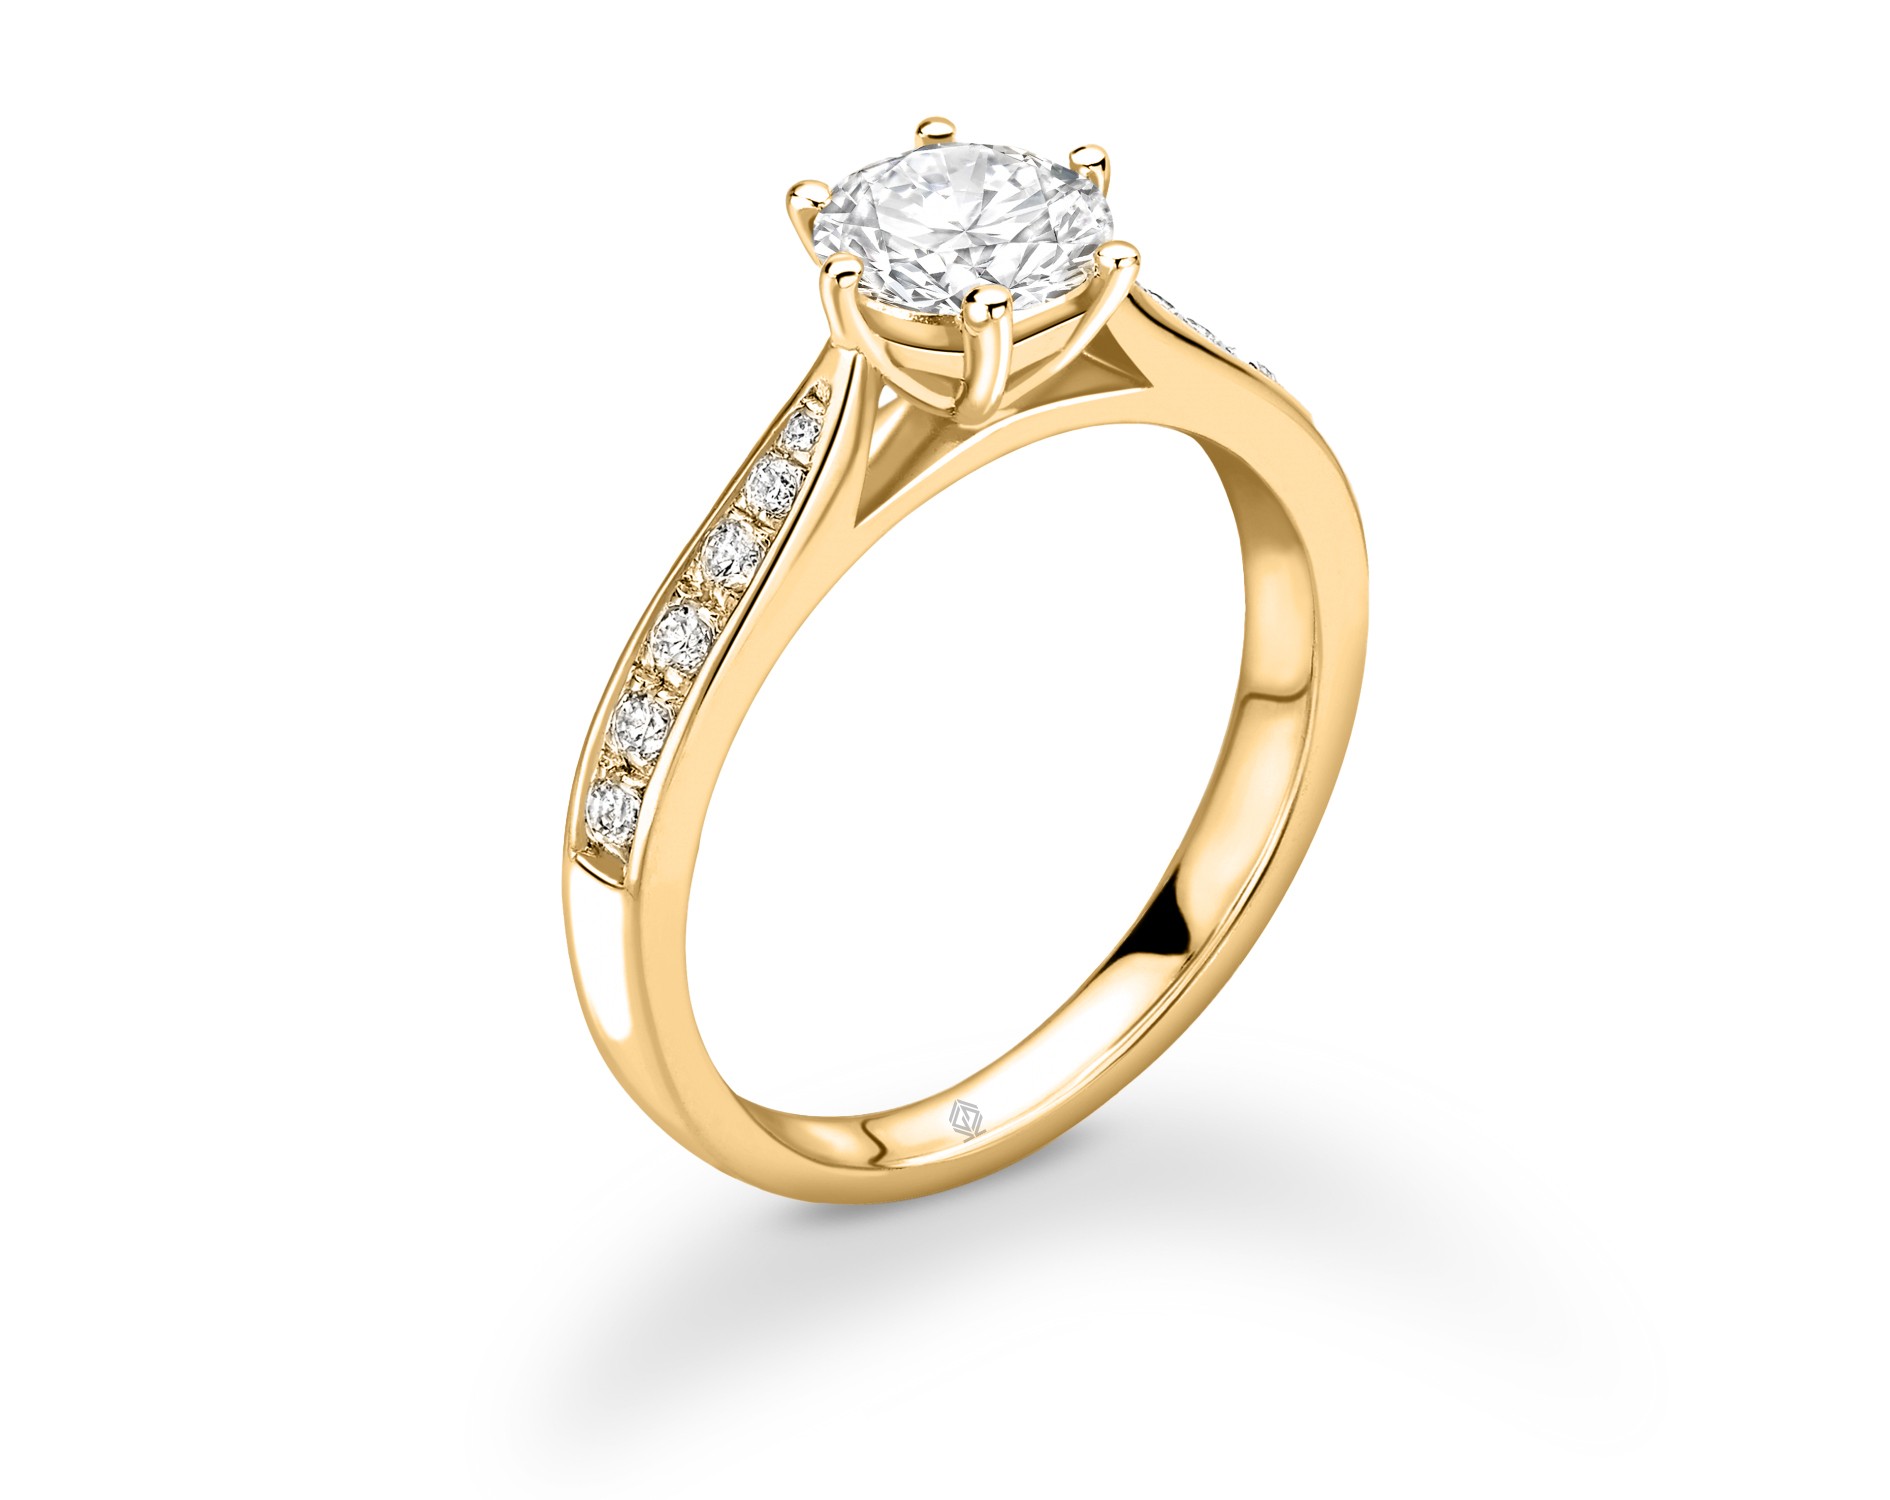 18K YELLOW GOLD 6 PRONGS ROUND CUT DIAMOND ENGAGEMENT RING WITH SIDE STONES CHANNEL SET